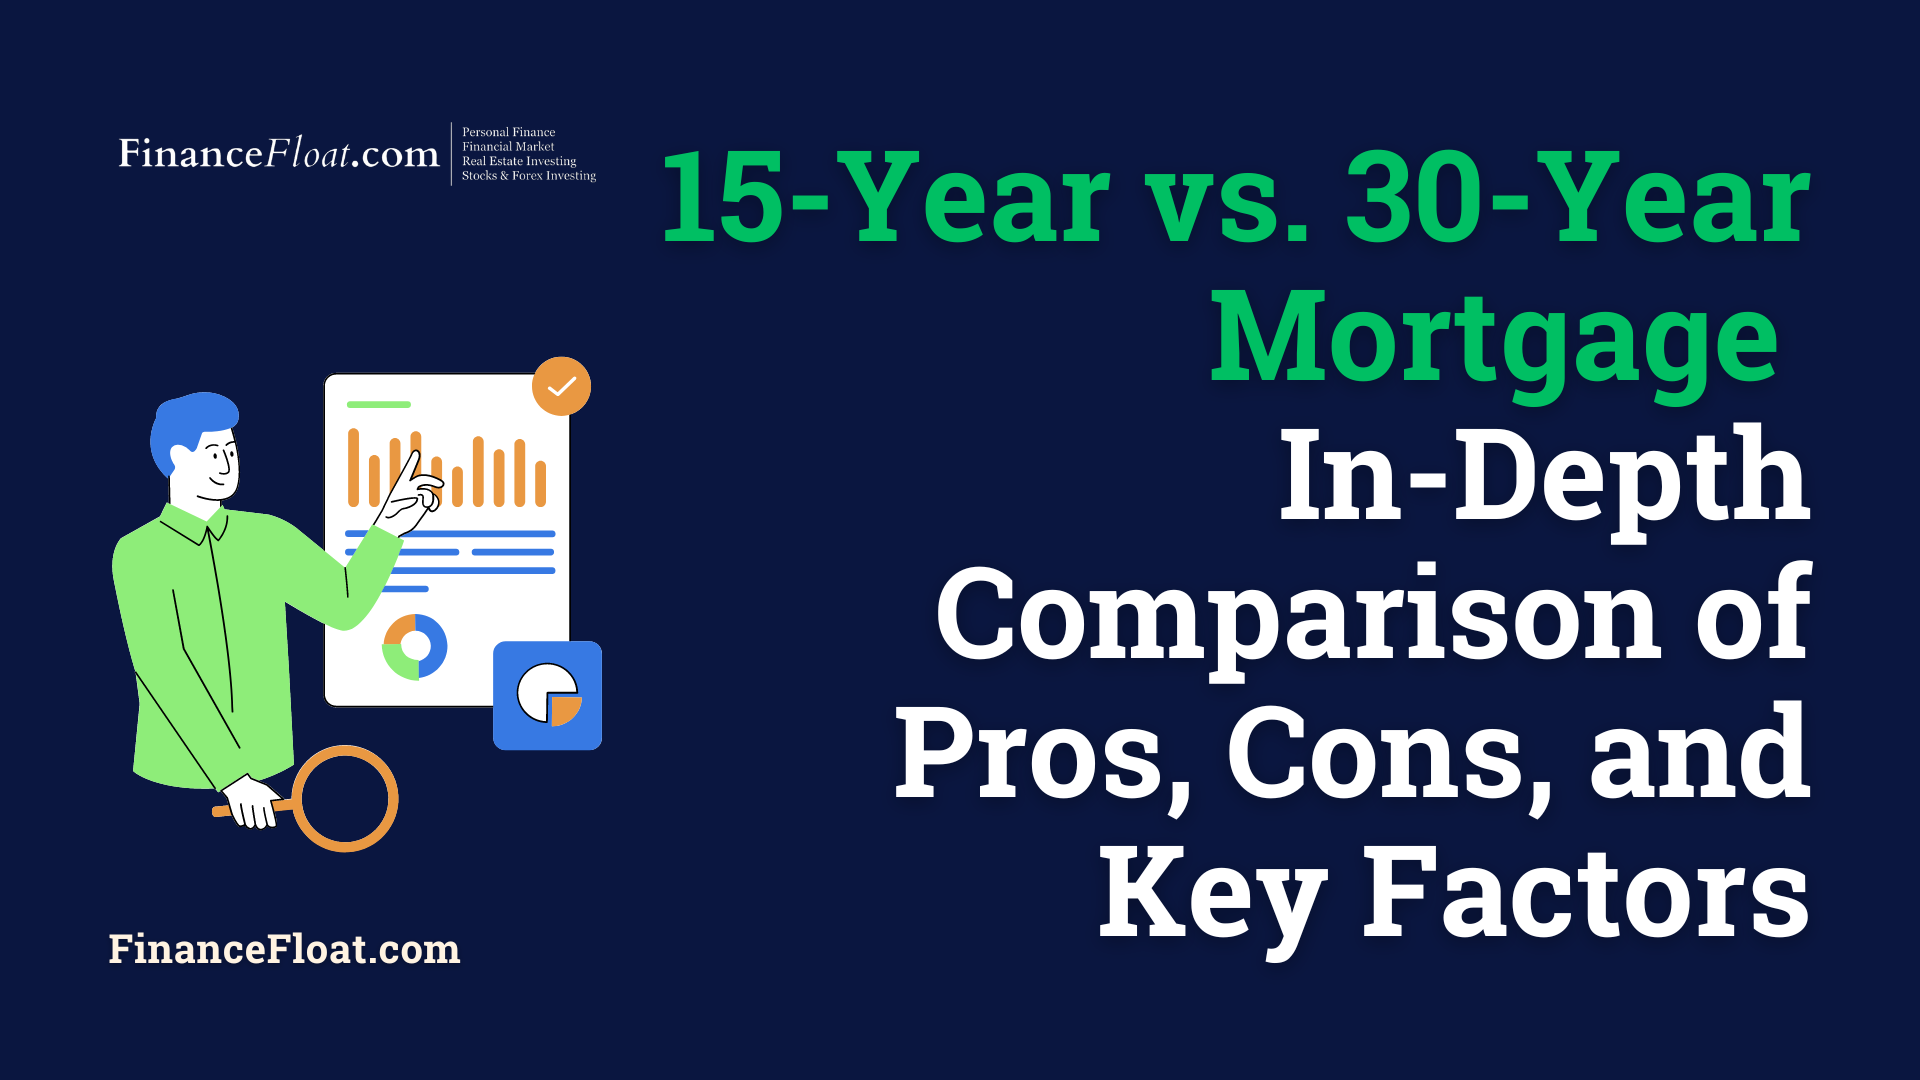 15-Year vs. 30-Year Mortgage In-Depth Comparison of Pros, Cons, and Key Factors